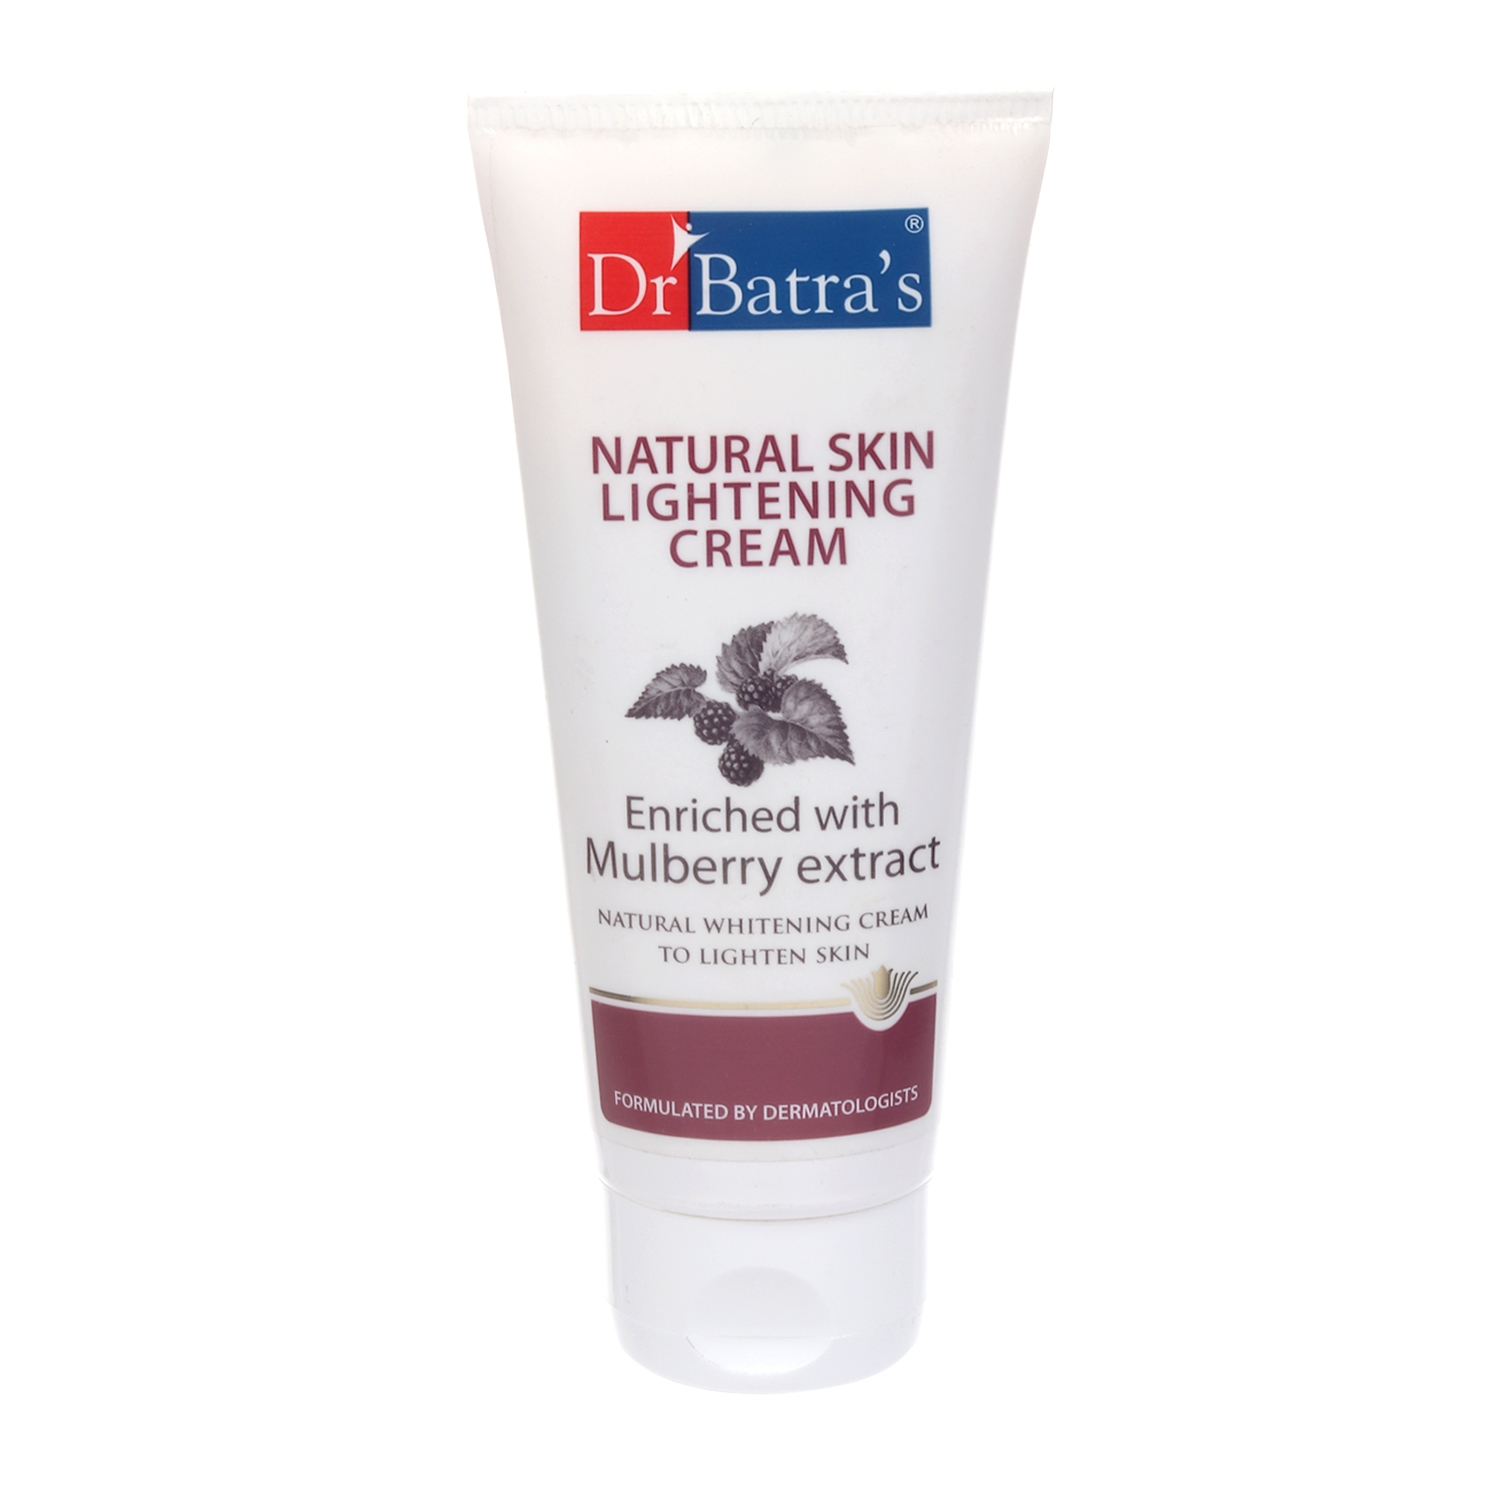 Dr Batra's | Dr Batra's Natural Skin Lightening Cream Enriched With Mulberry Extract - 100 gm